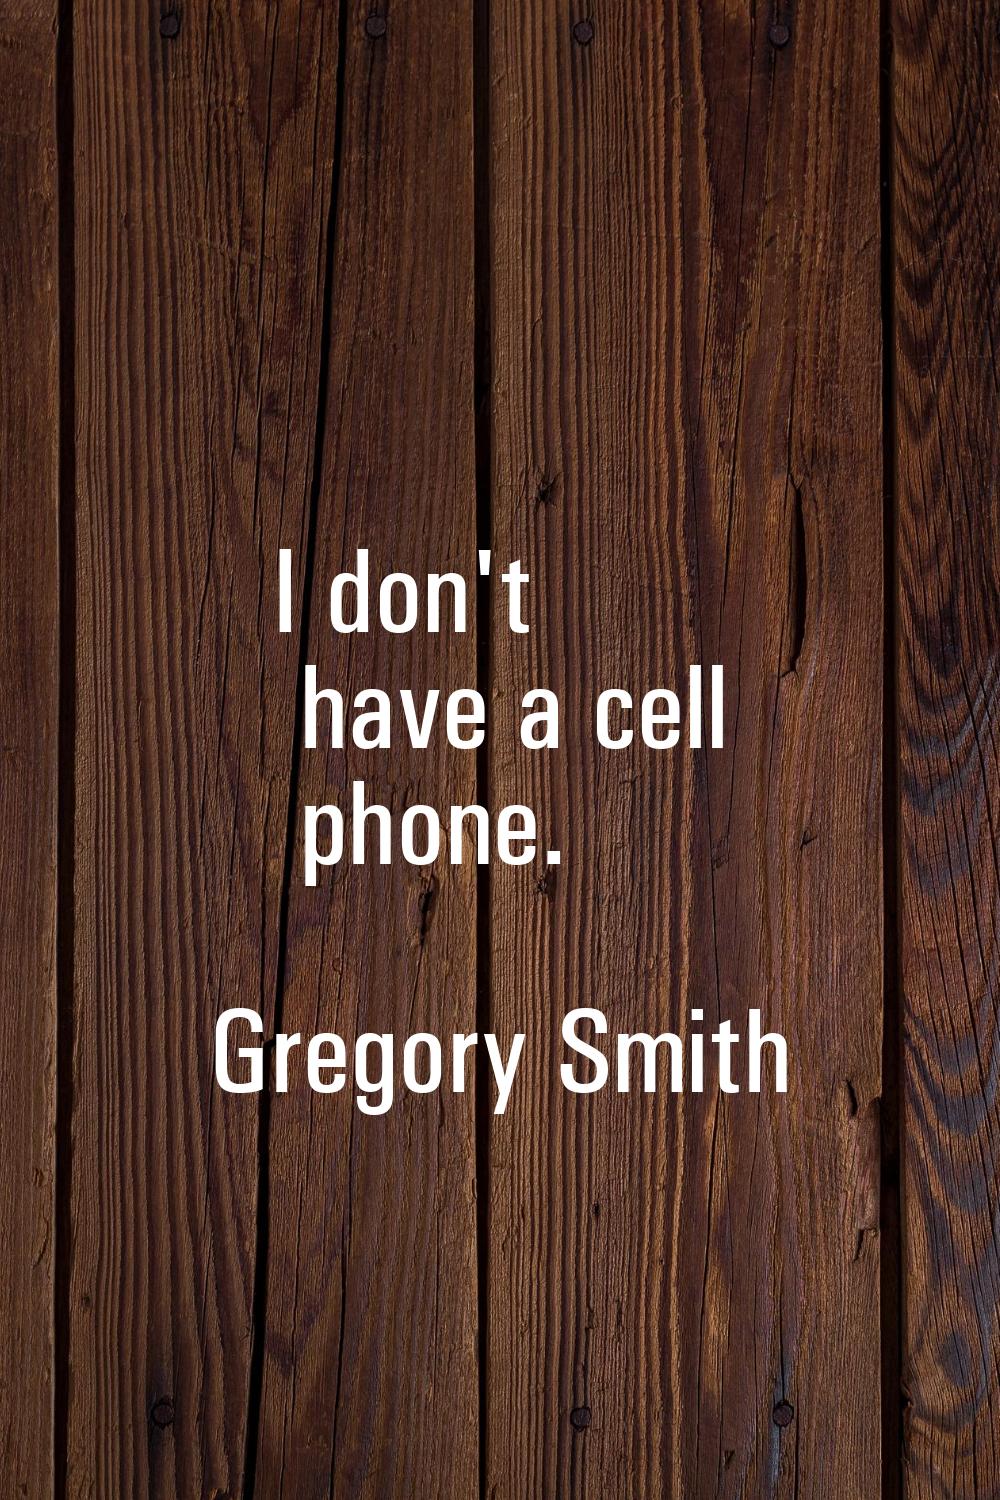 I don't have a cell phone.